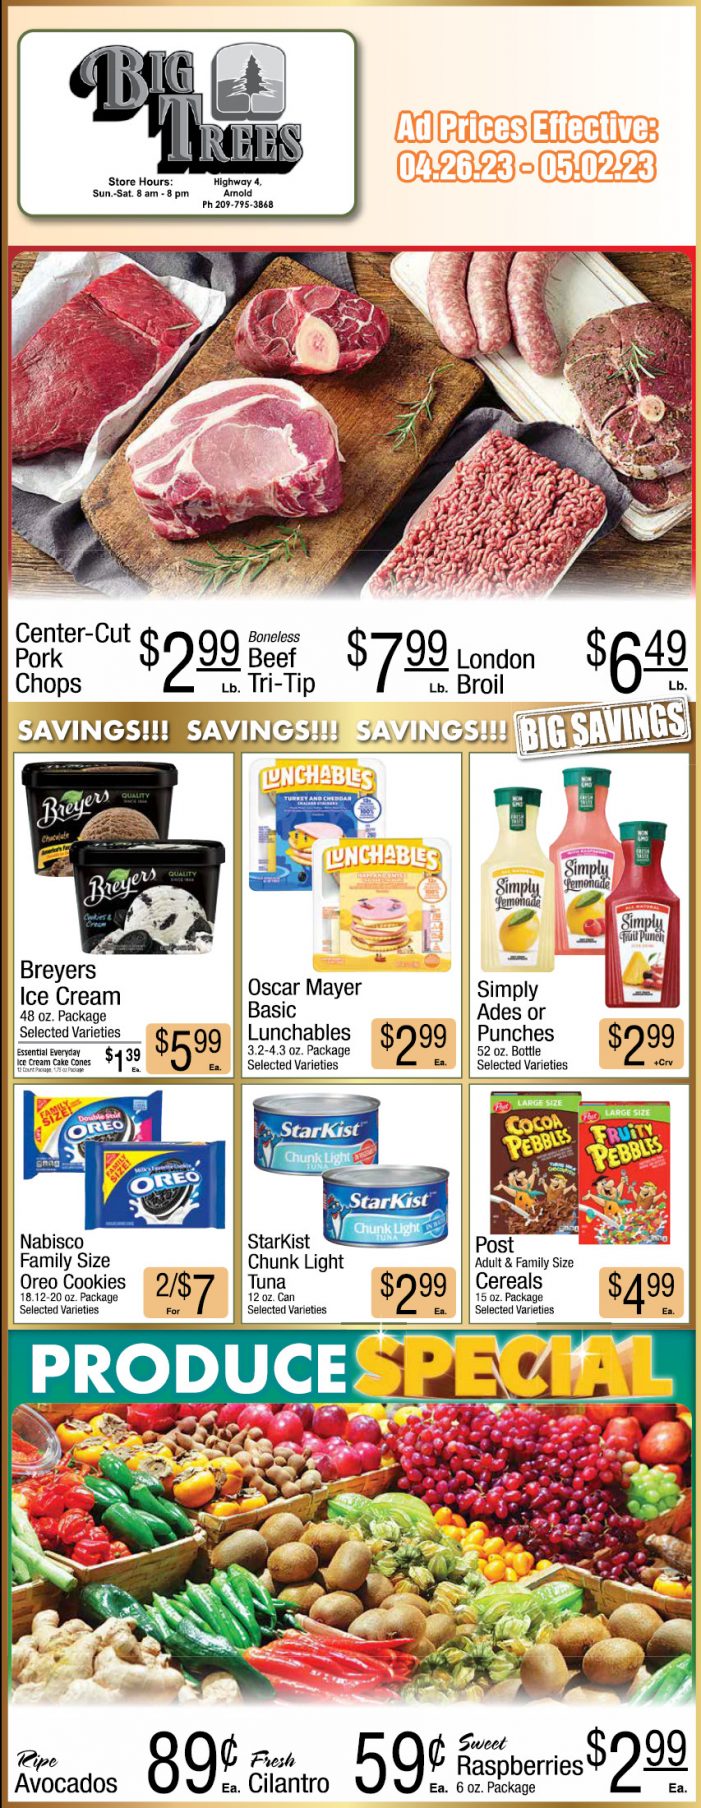 Big Trees Market Weekly Ad, Grocery, Produce, Meat & Deli Specials April 26 – May 2nd!  Shop Local & Save!